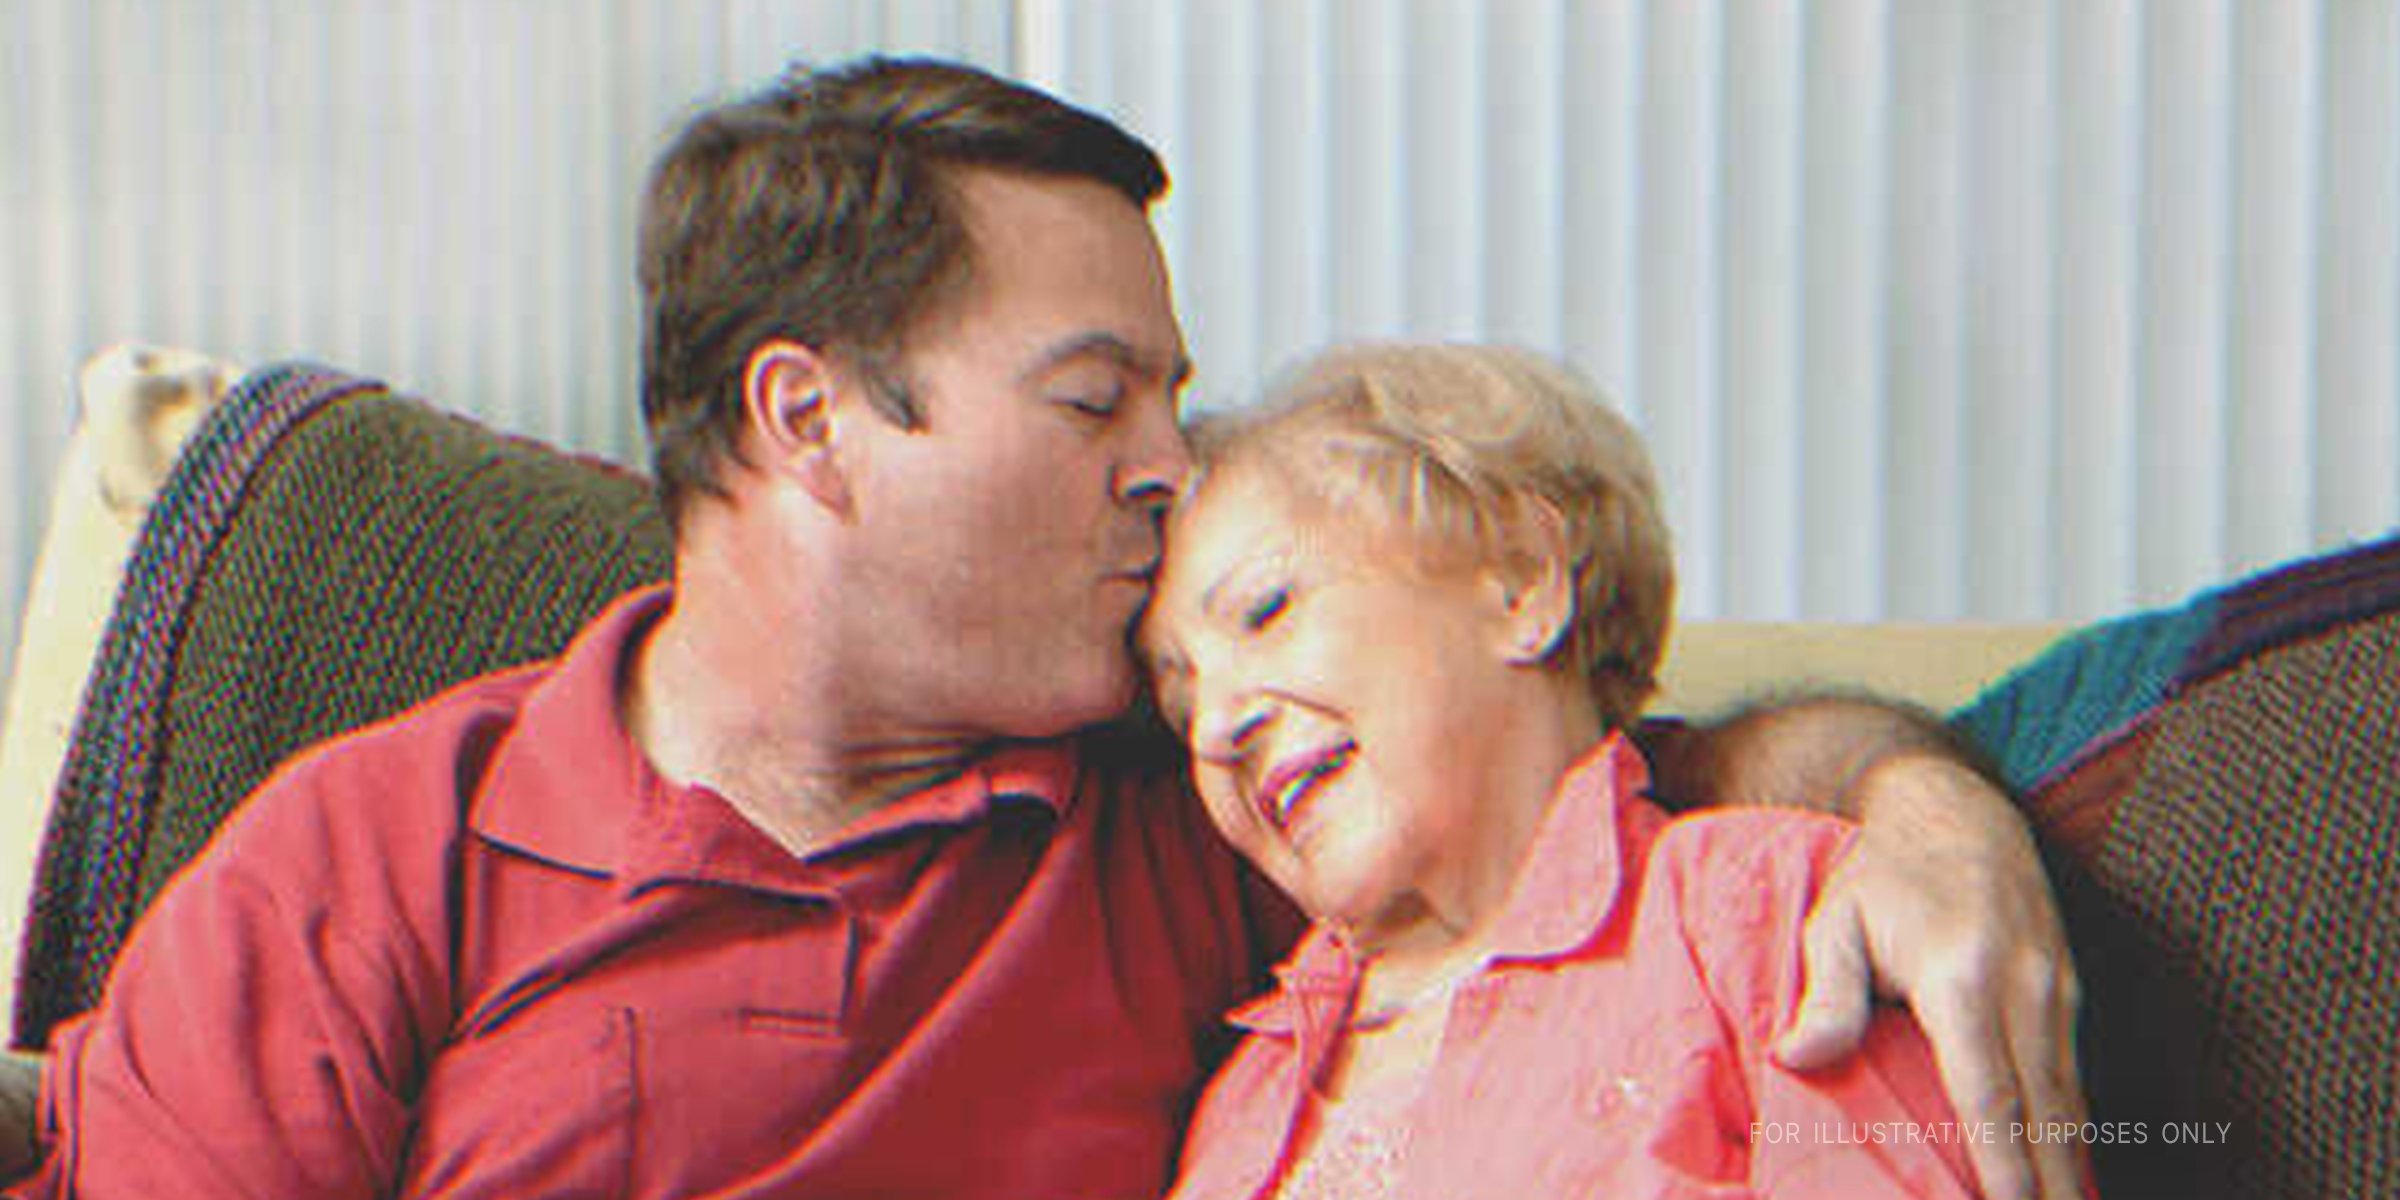 Man kissing motherly older woman on the forehead | Source: Shutterstock